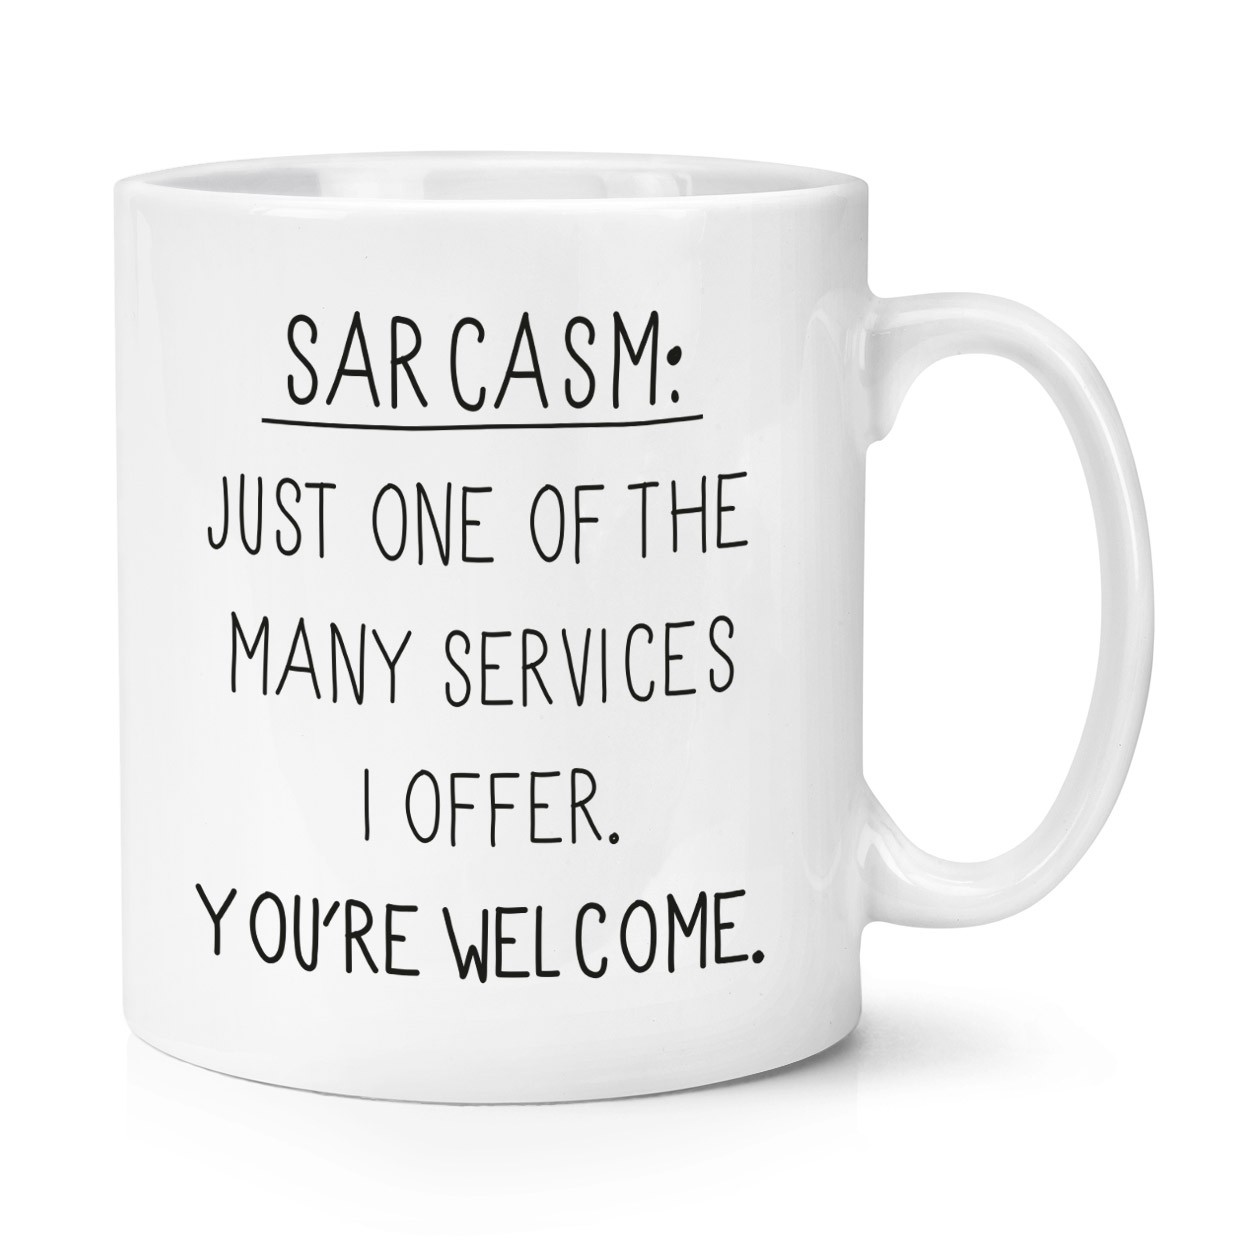 Sarcasm One Of The Many Services 10oz Mug Cup